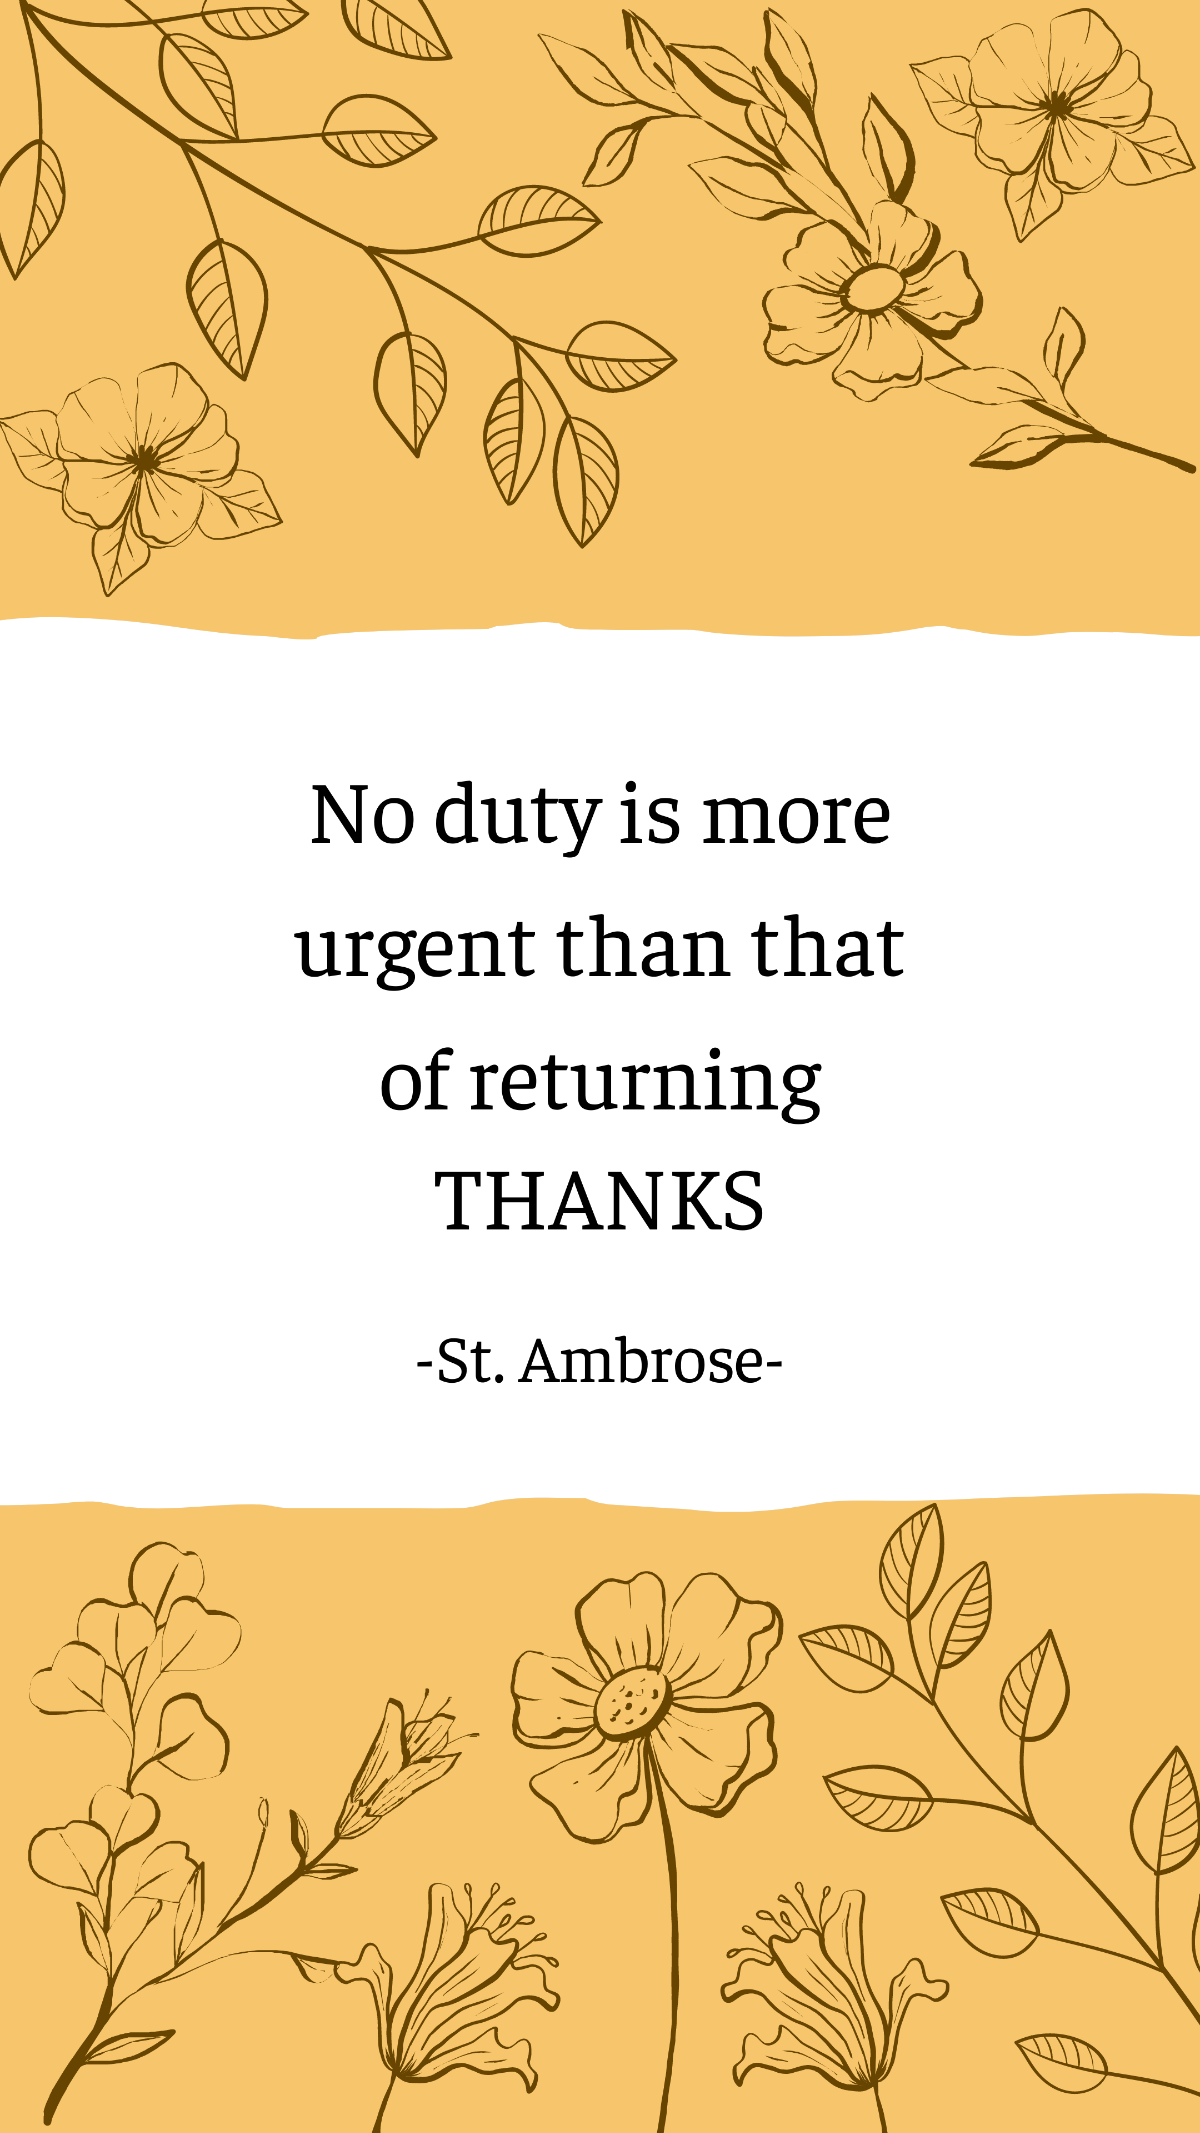 St. Ambrose - No duty is more urgent than that of returning thanks Template